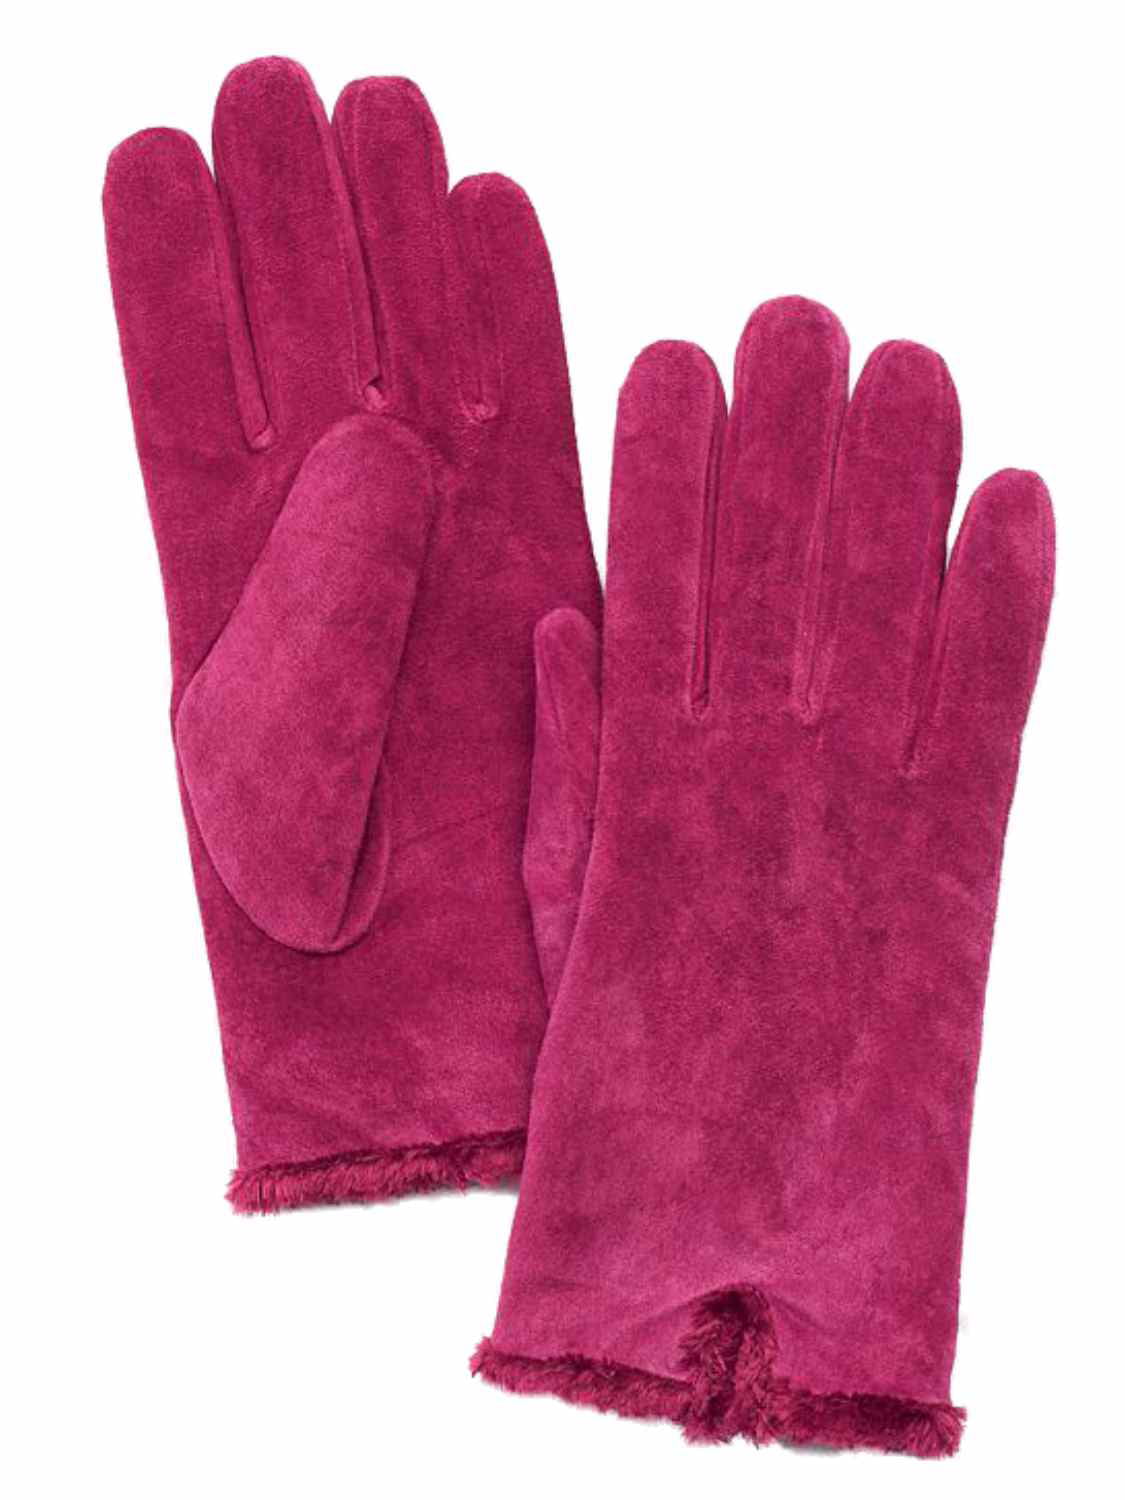 Texting Gloves Winterberry Red Cashmere Arm Warmers Hand Warmers Fingerless Gloves